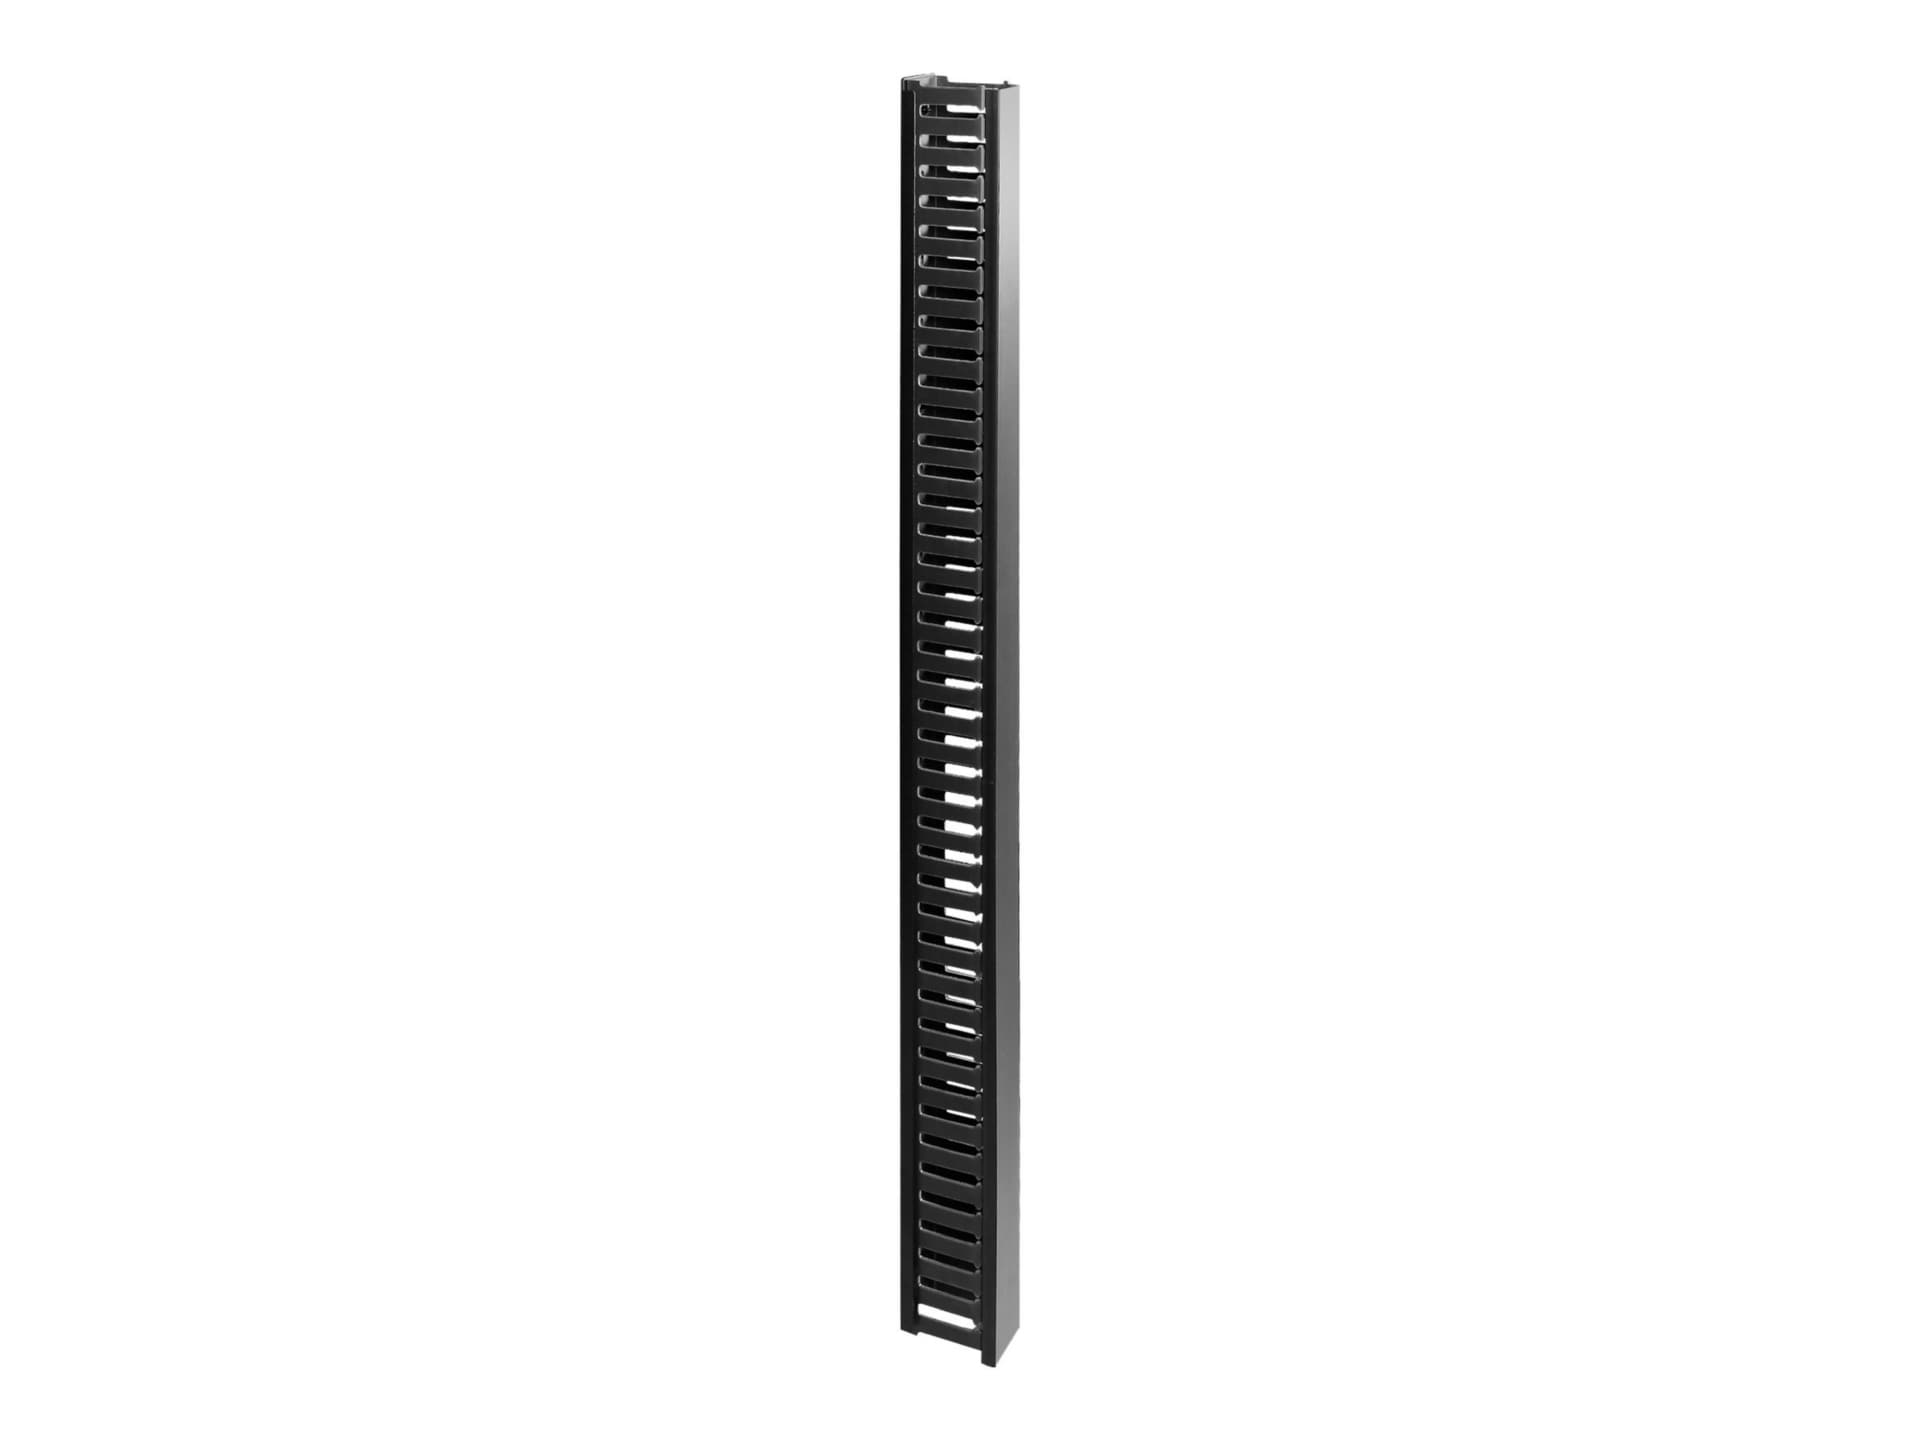 CyberPower Carbon CRA30001 - rack cable management finger duct